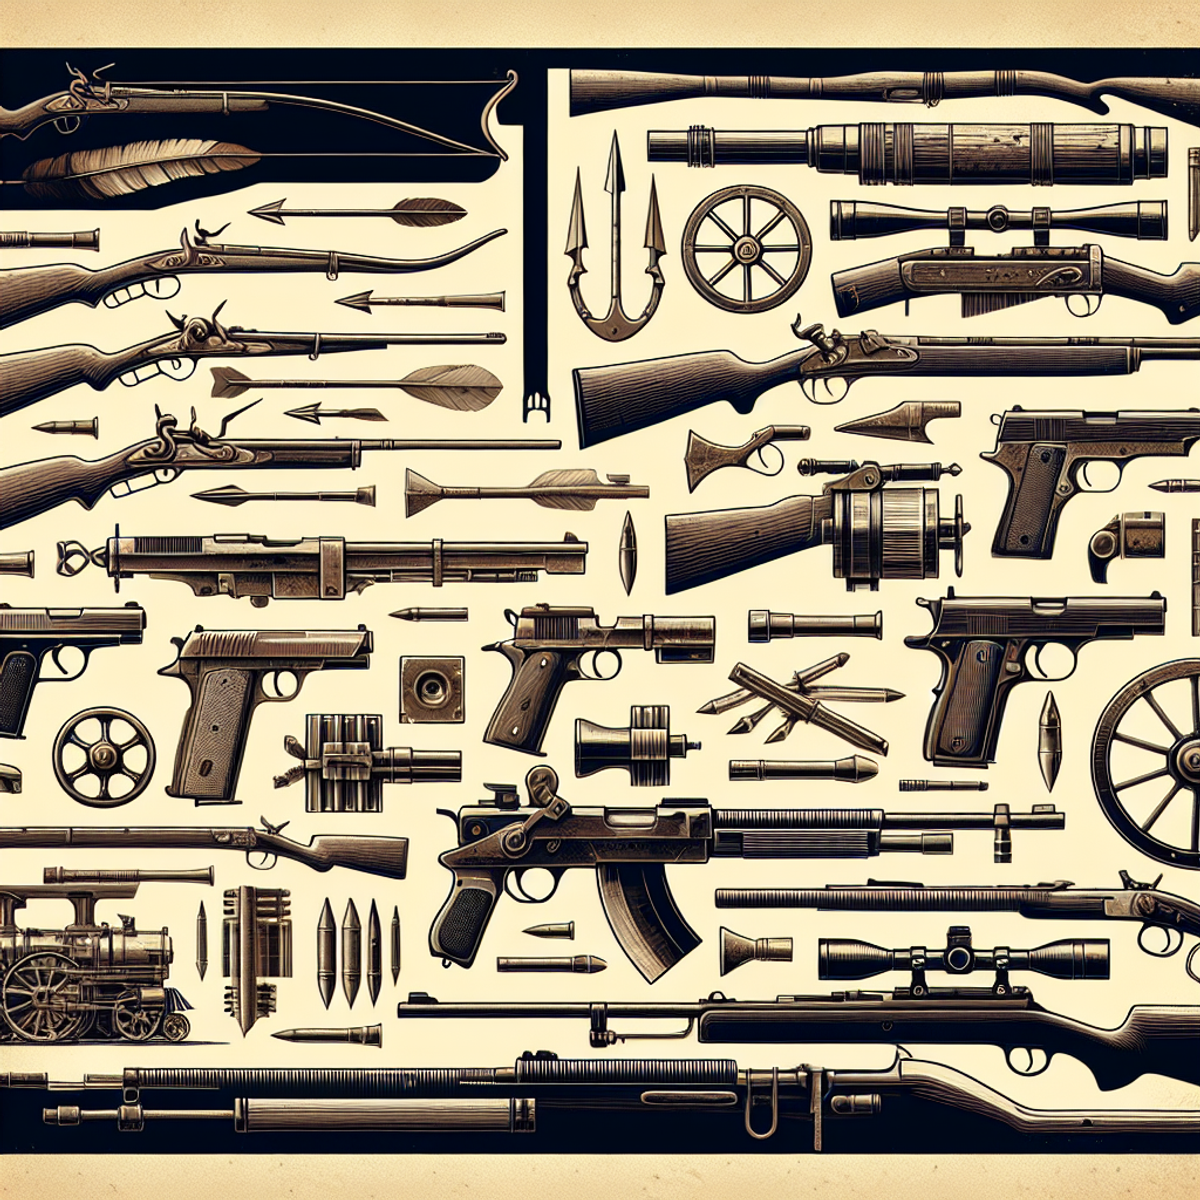 A collage of military firearms